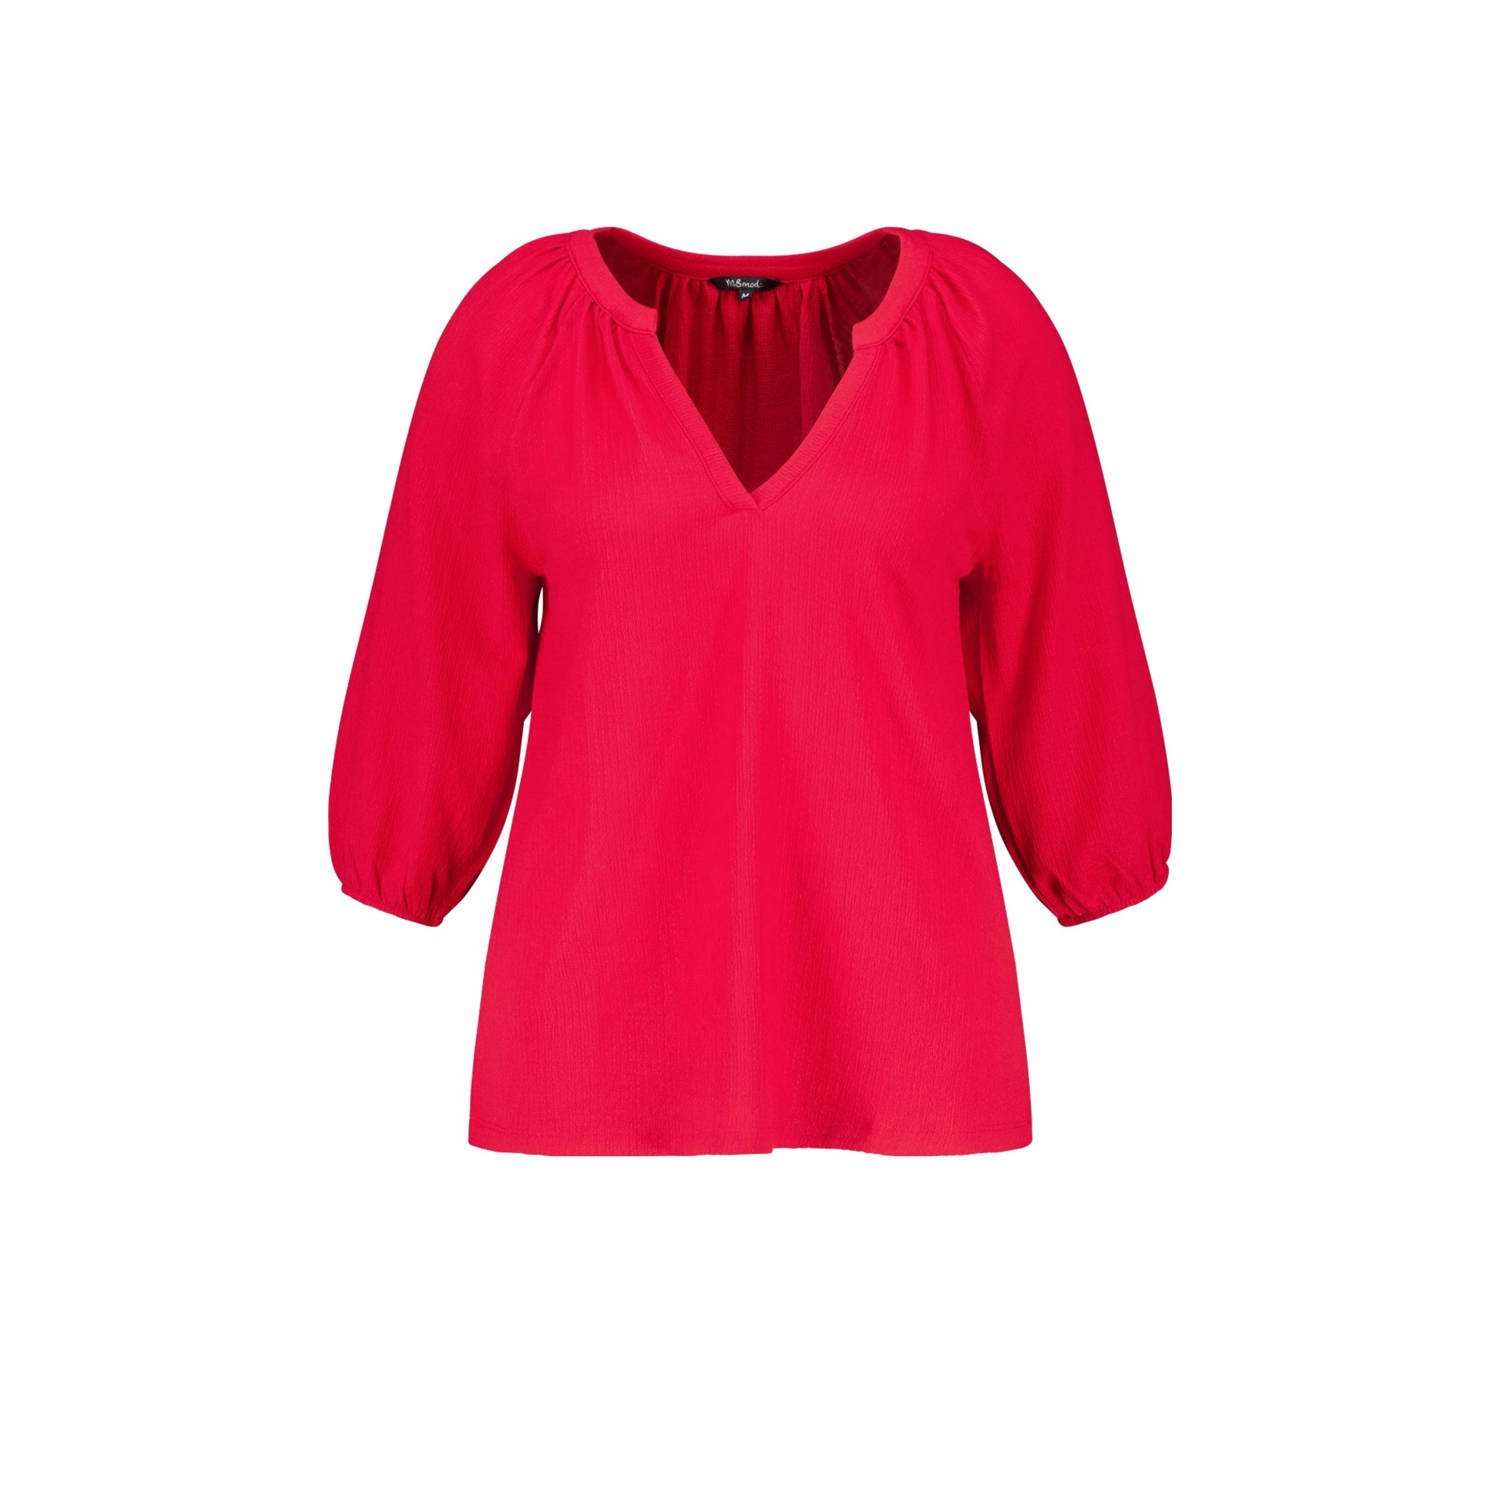 MS Mode top rood